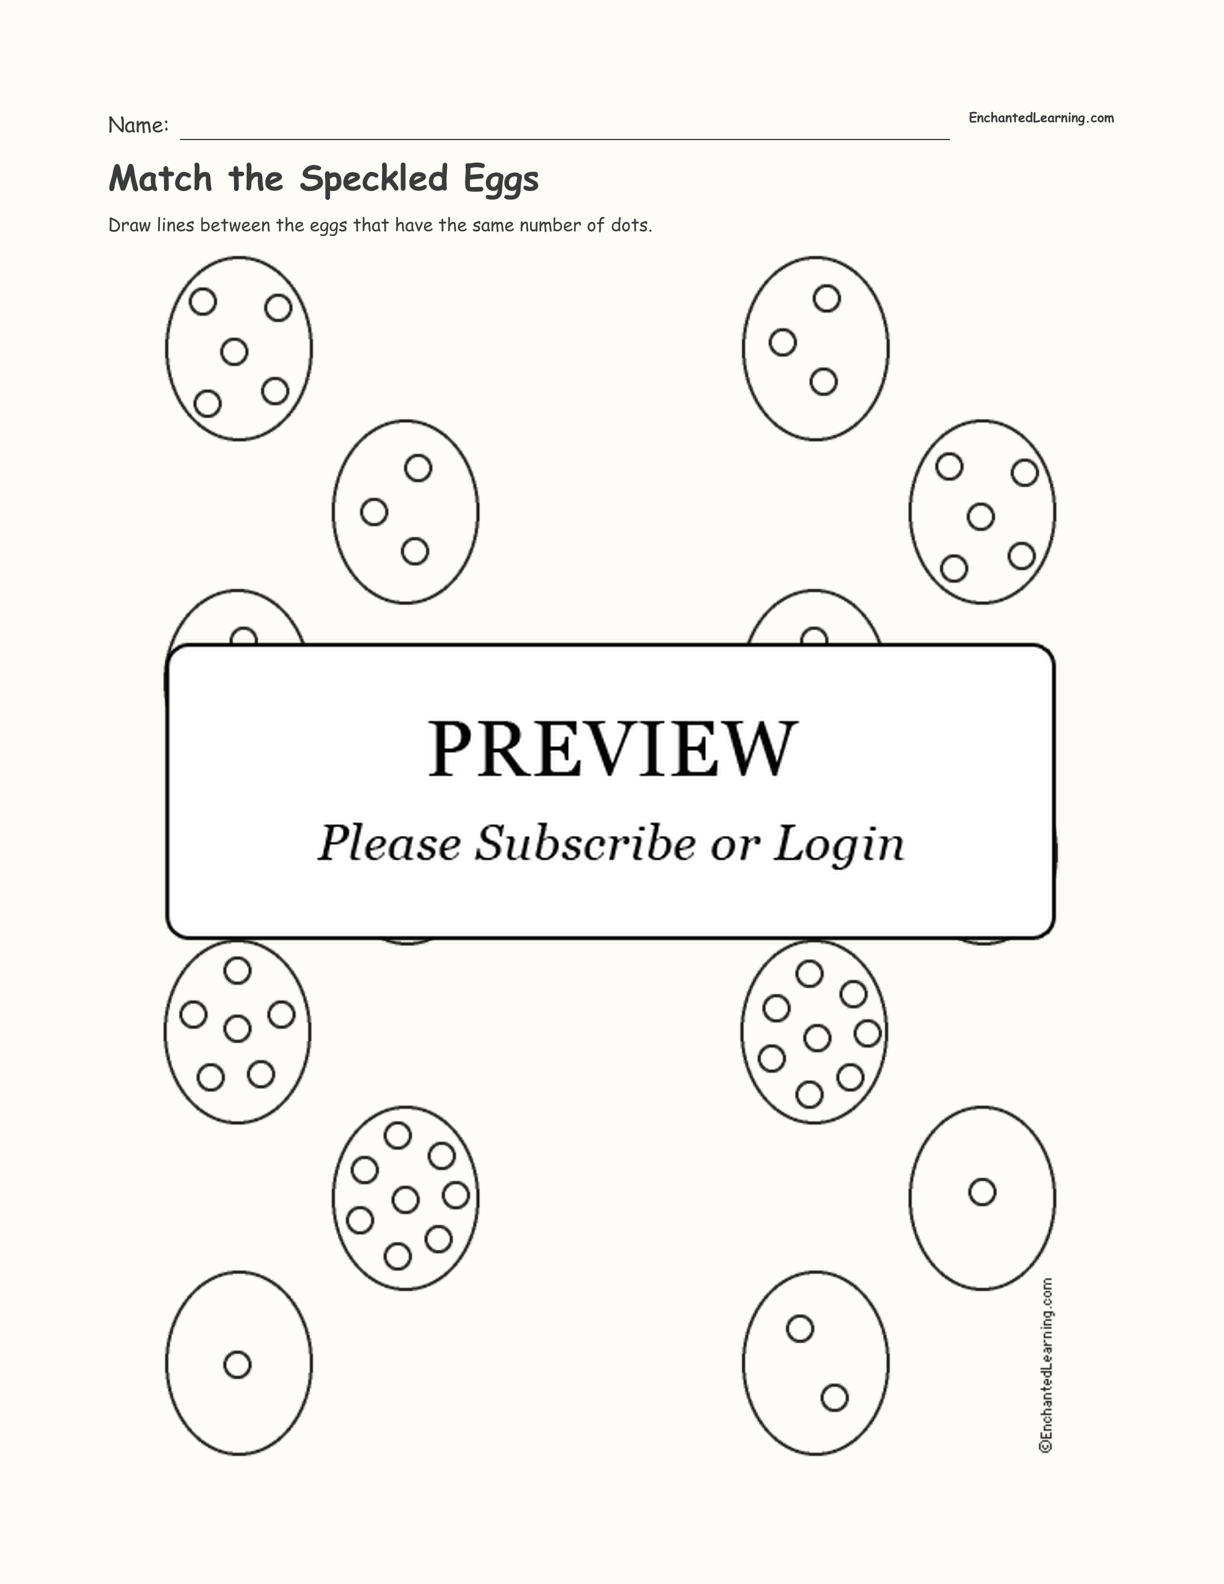 Match the Speckled Eggs interactive worksheet page 1